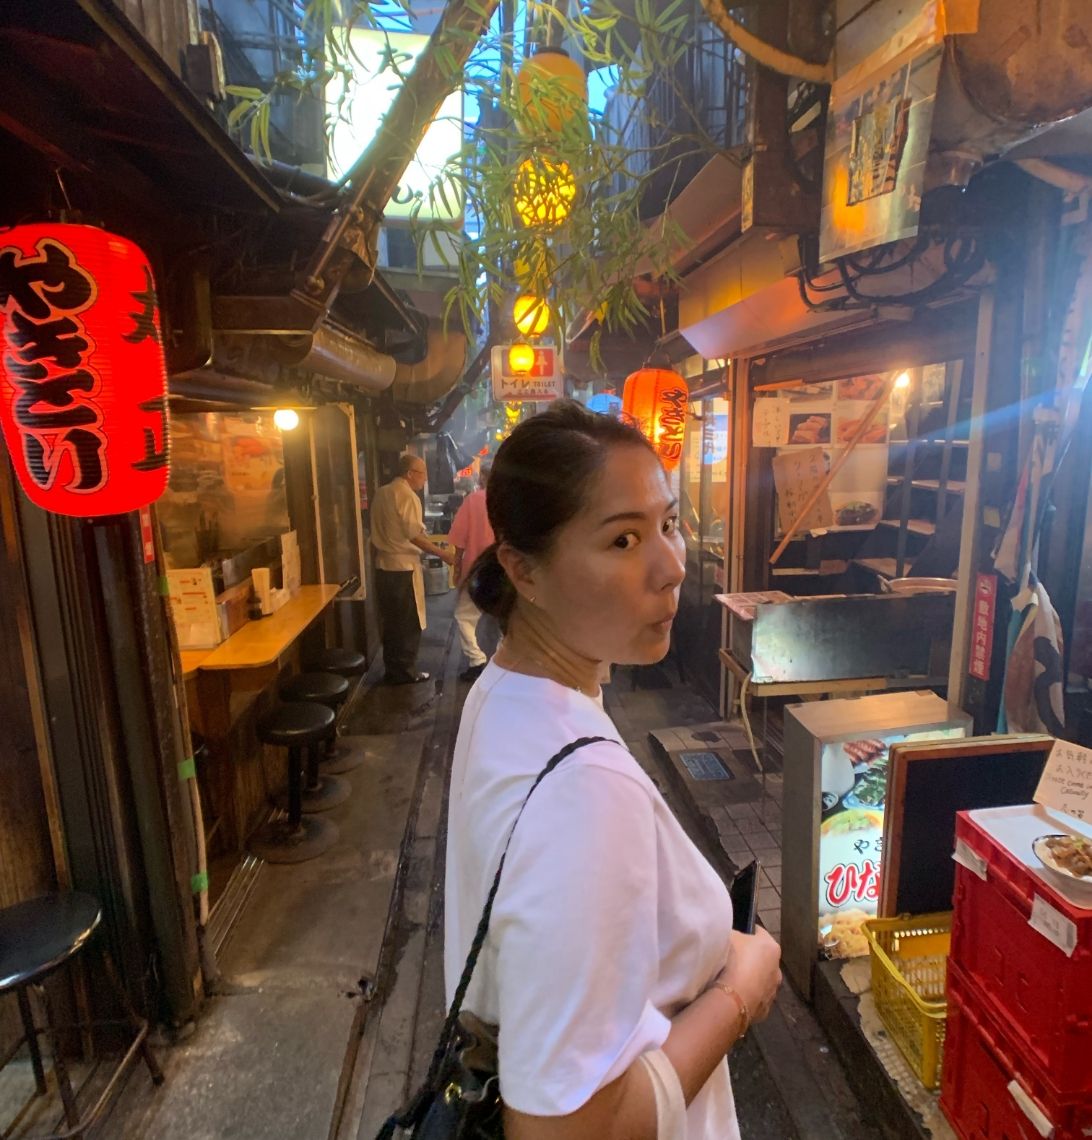 The New Moon Team Recommends, Lately at The New Moon, for September 2022, photo of Fumi Kamigama in Shinjuku alley filled with street food vendors